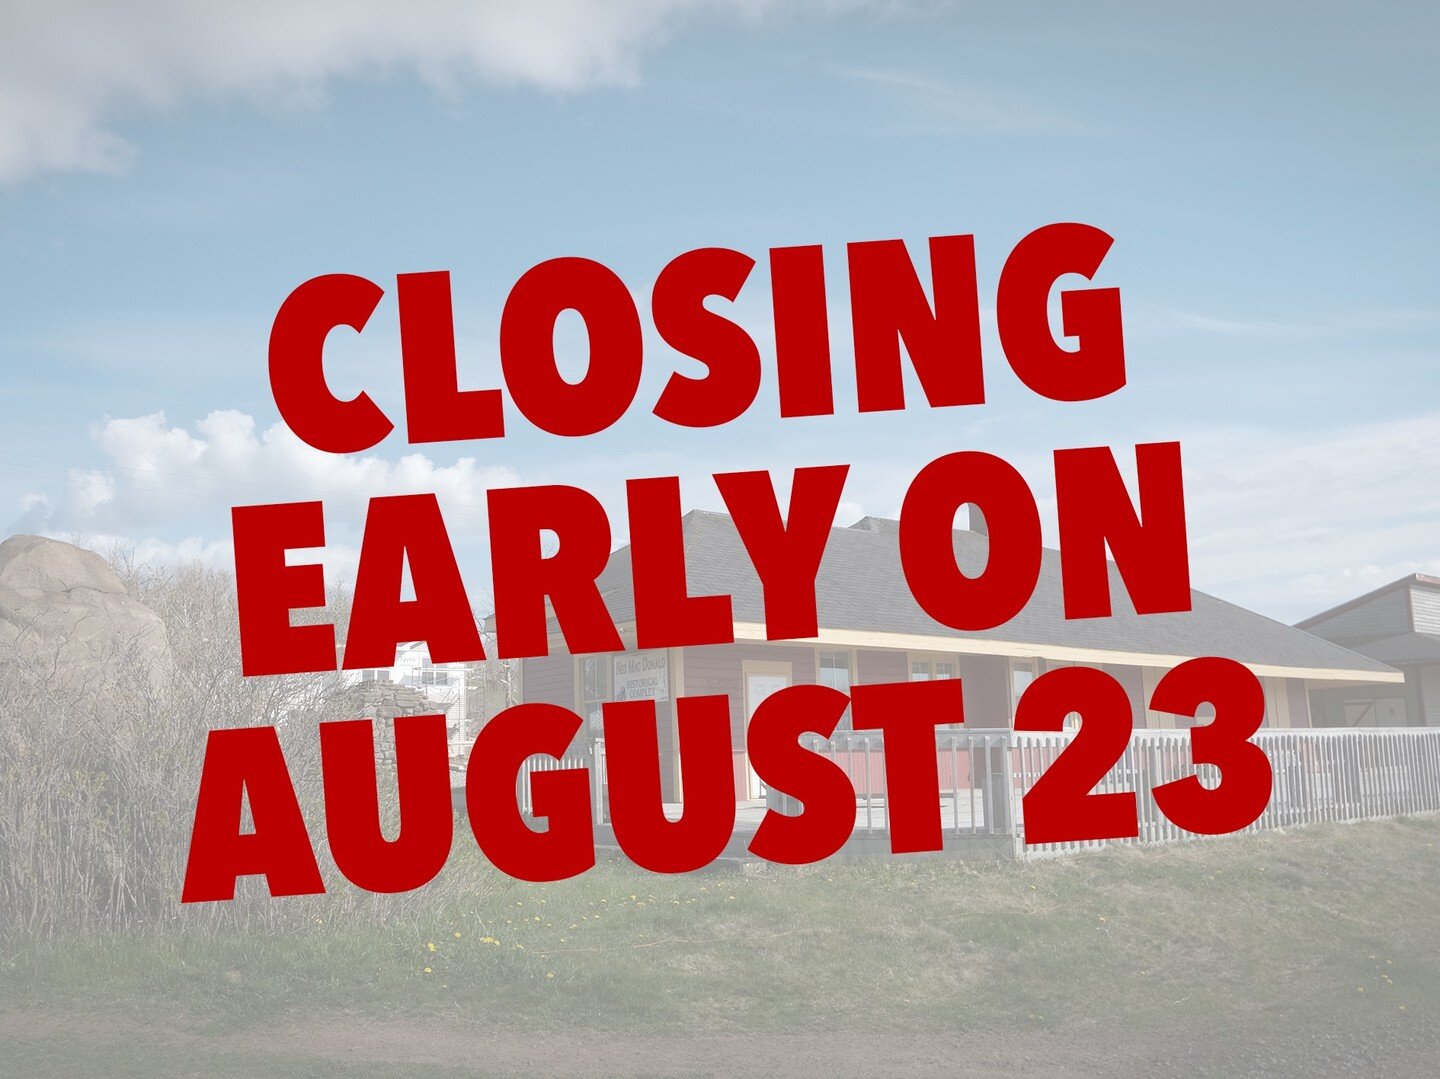 ⛔️ WE CLOSE EARLY ON THE 23rd of AUGUST:

The Inverness Miners Museum will be closed on Tuesday, August 23rd at 12:00 noon. The museum will still be open from 9:00am to 12:00pm on that date. We will close early in order to prepare for the world premi